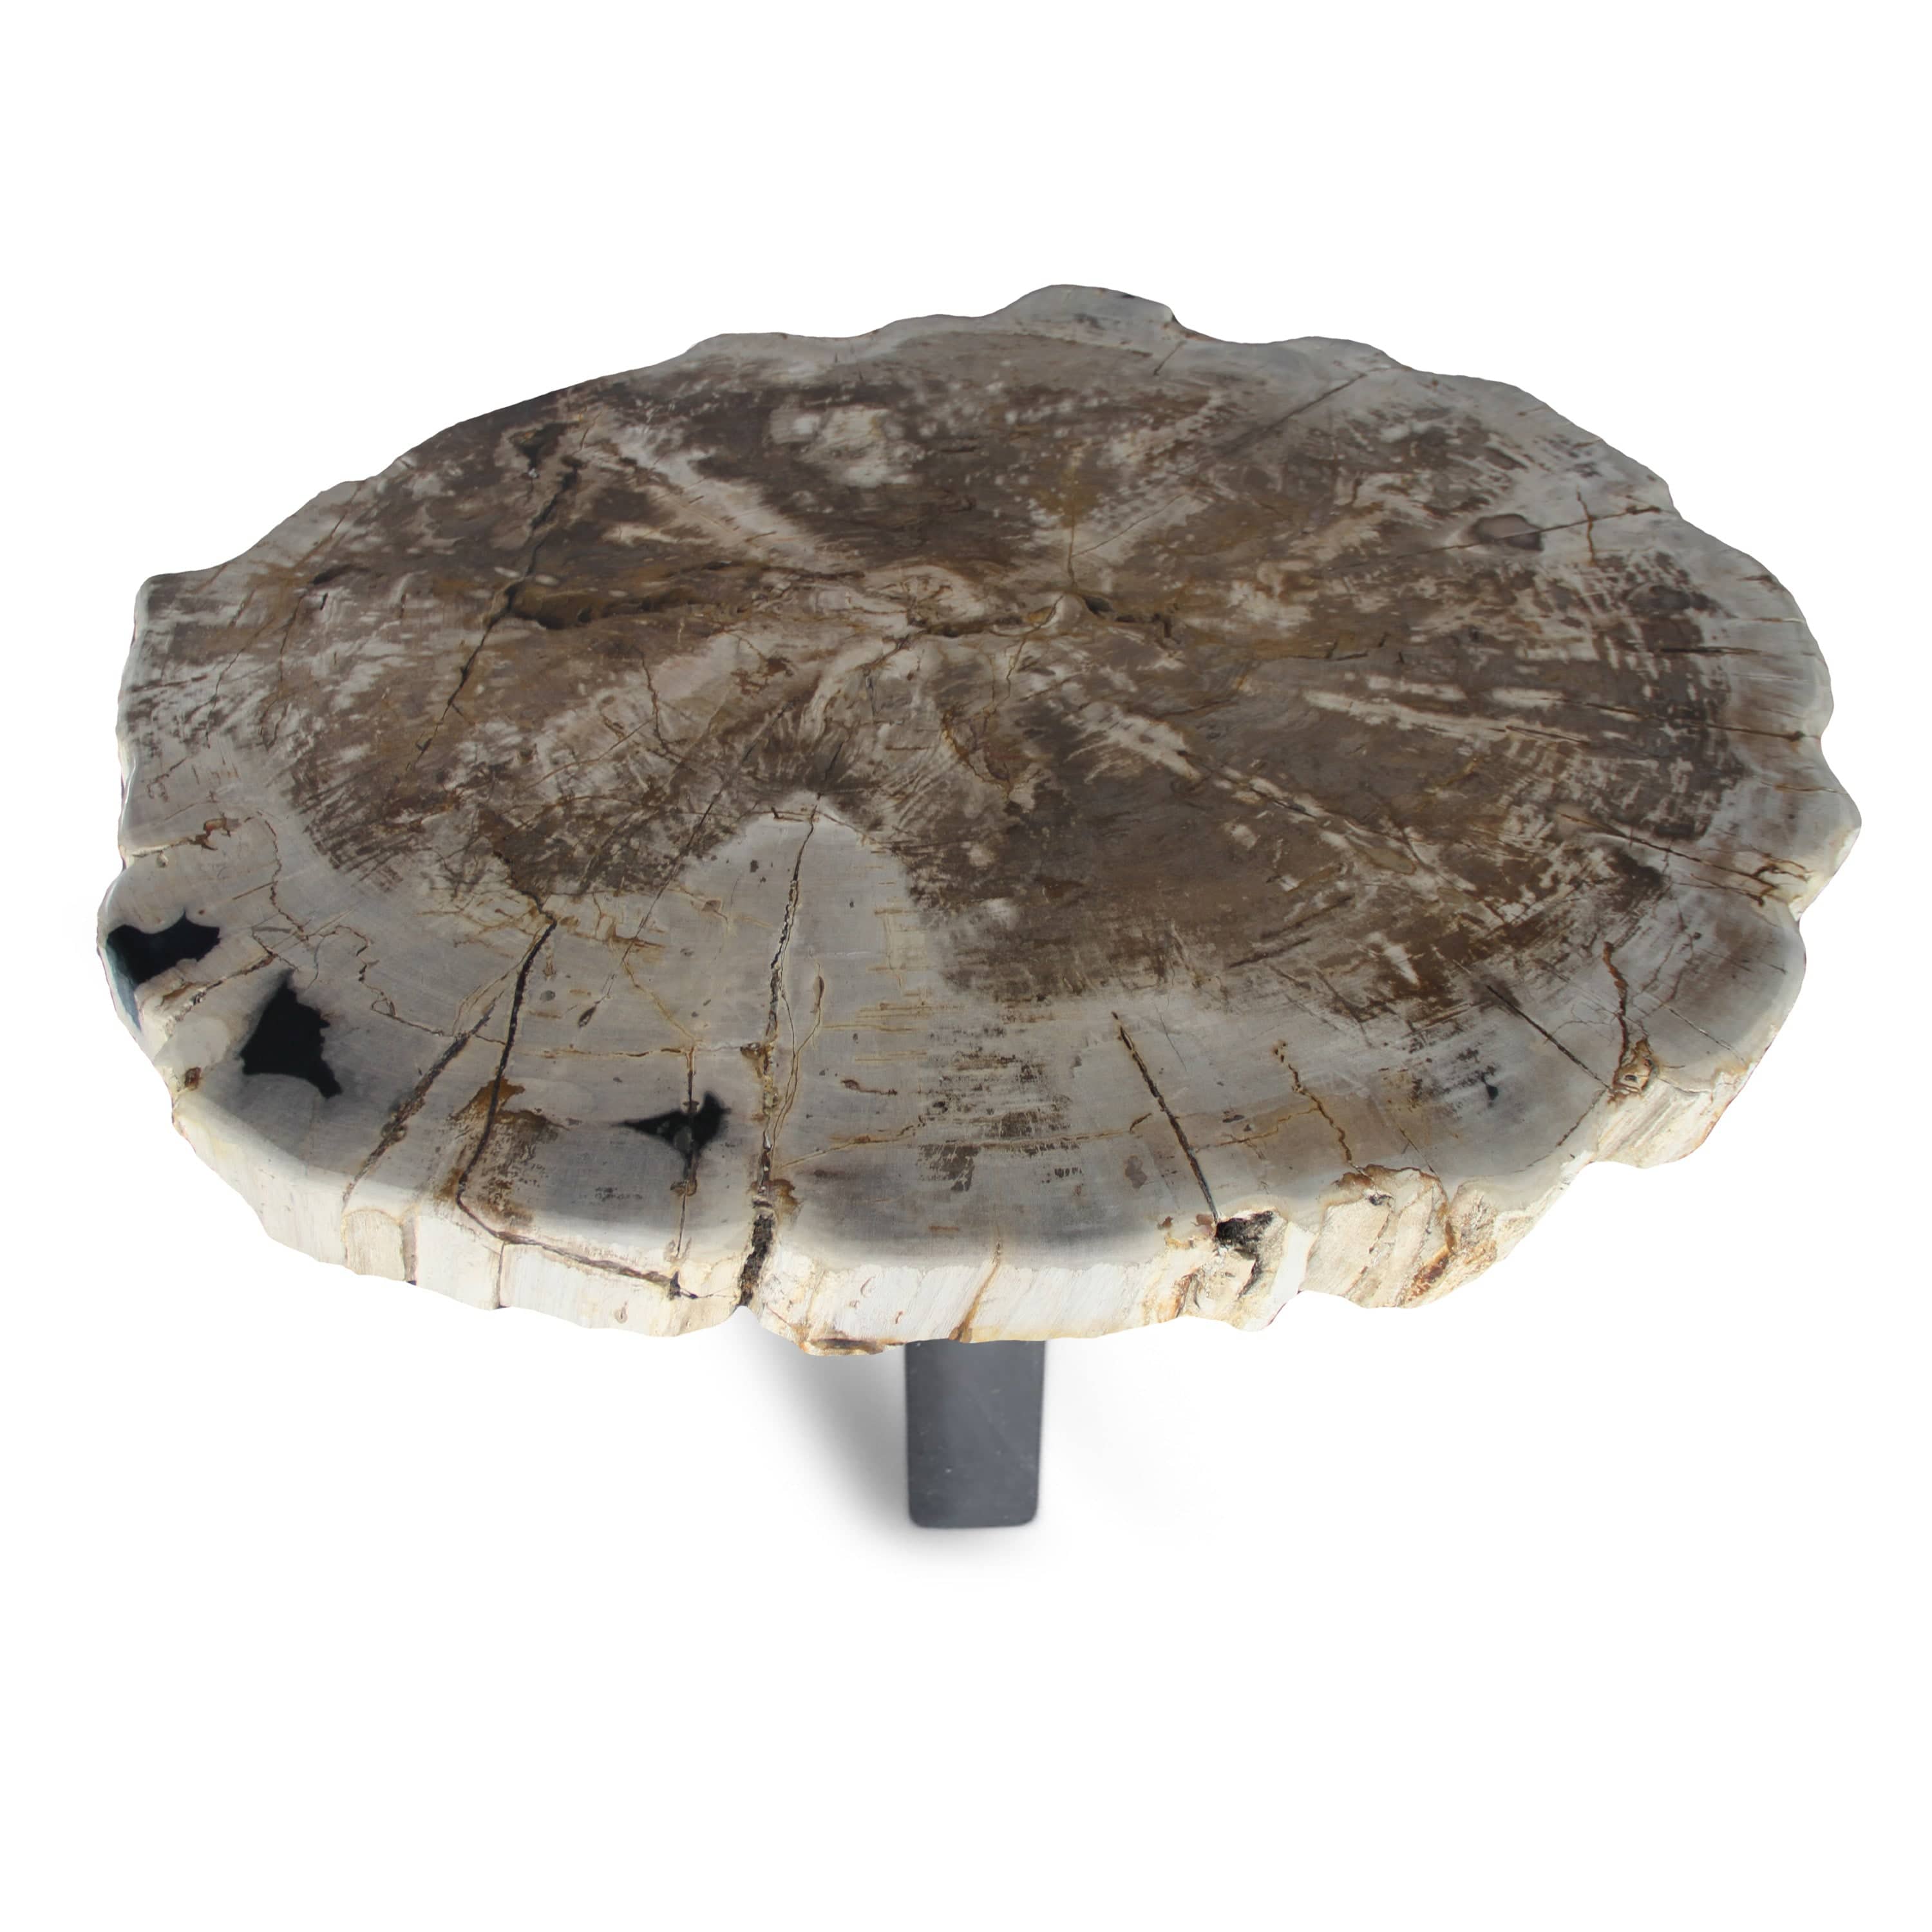 Kalifano Petrified Wood Petrified Wood Round Slab Coffee Table from Indonesia - 38" / 238 lbs PWT8800.002